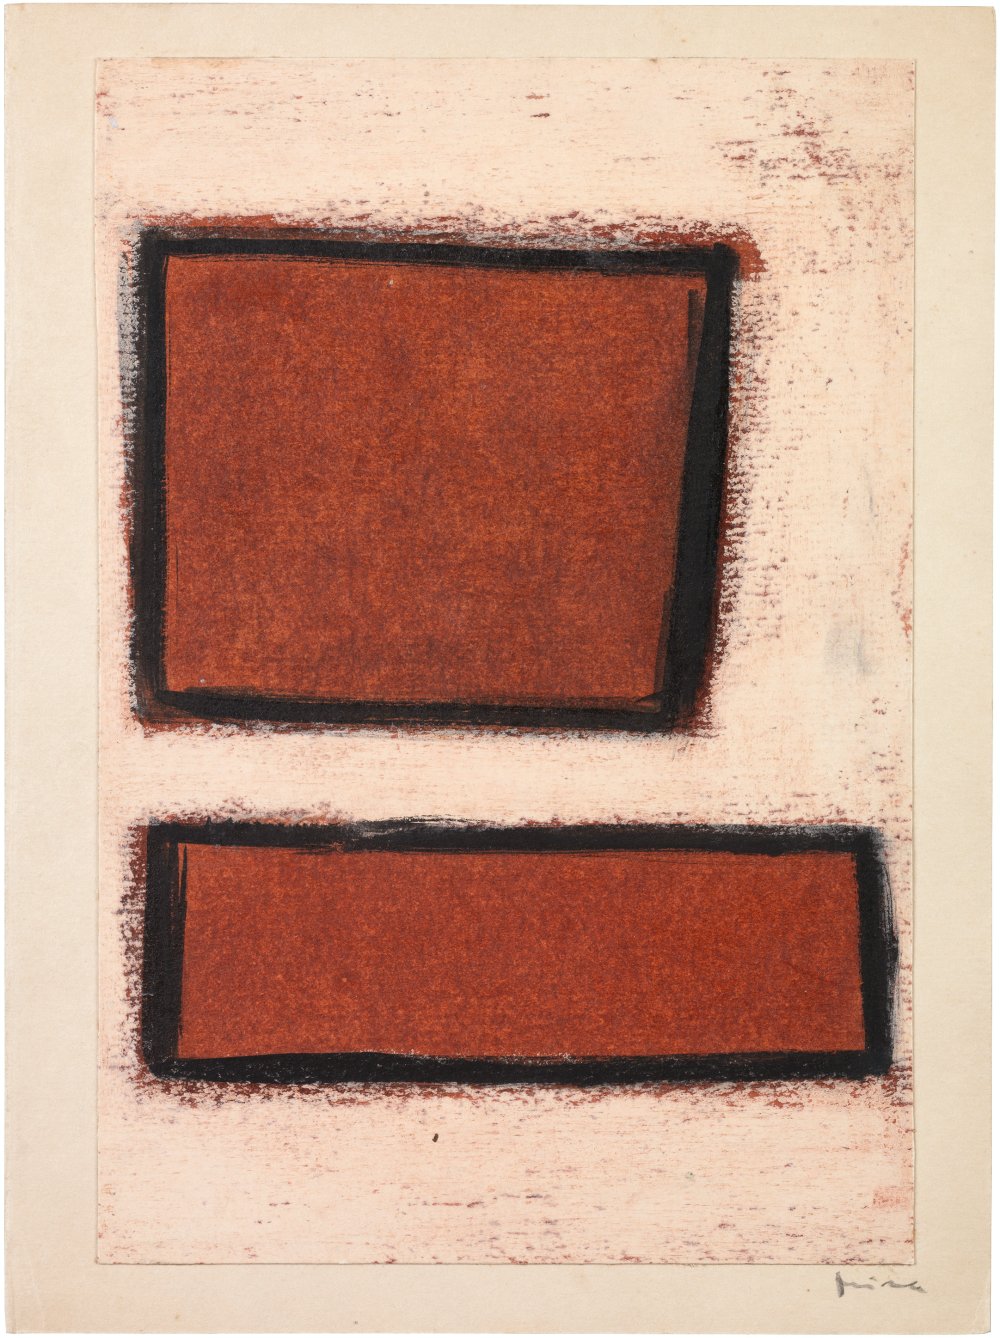 Mira Schendel, Untitled (Two red forms), ca. 1960